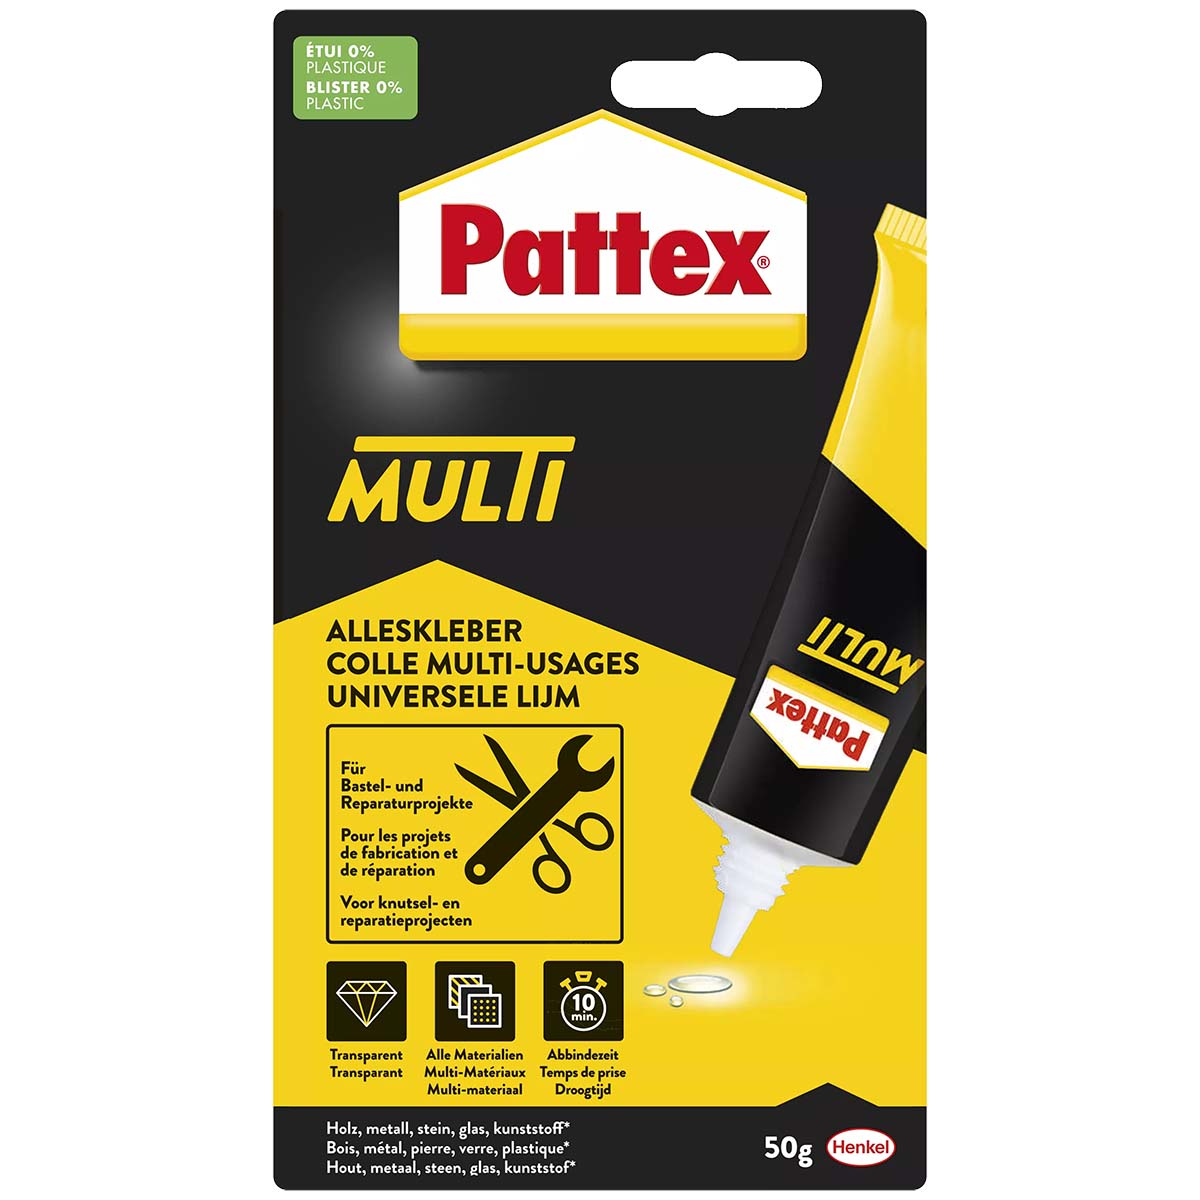 5712173 Extra strong Pattex Multi purpose glue Transparent, leaves no glue marks and is therefore most suitable for transparent surfaces or coloured materials. Thanks to a shorter drying time, the product can be used quickly and flexibly. This adhesive can be best used indoors, attaches quickly and is heat resistant.